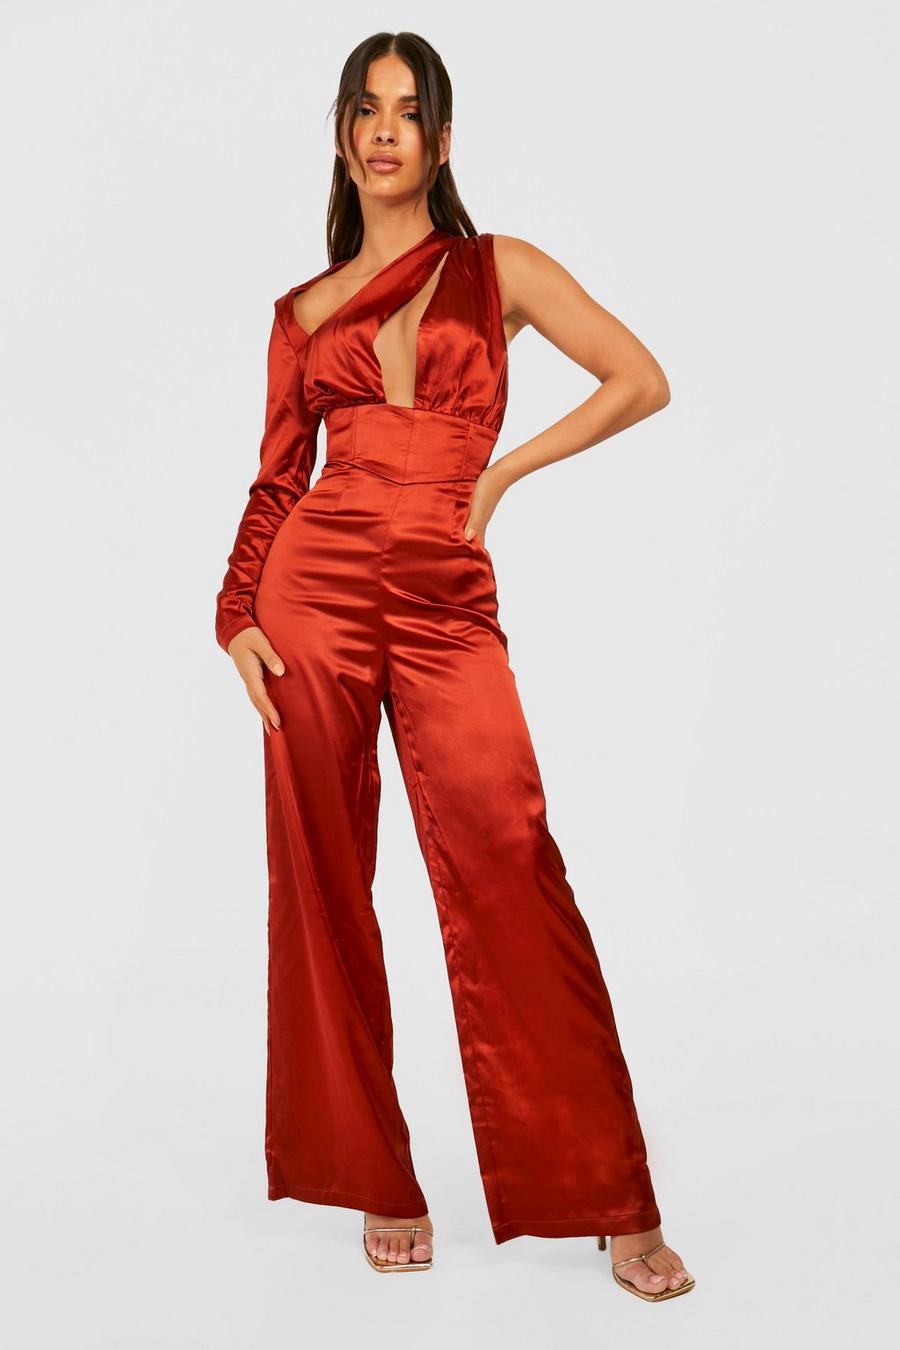 Chocolate brown Satin Cut Out One Shoulder Jumpsuit